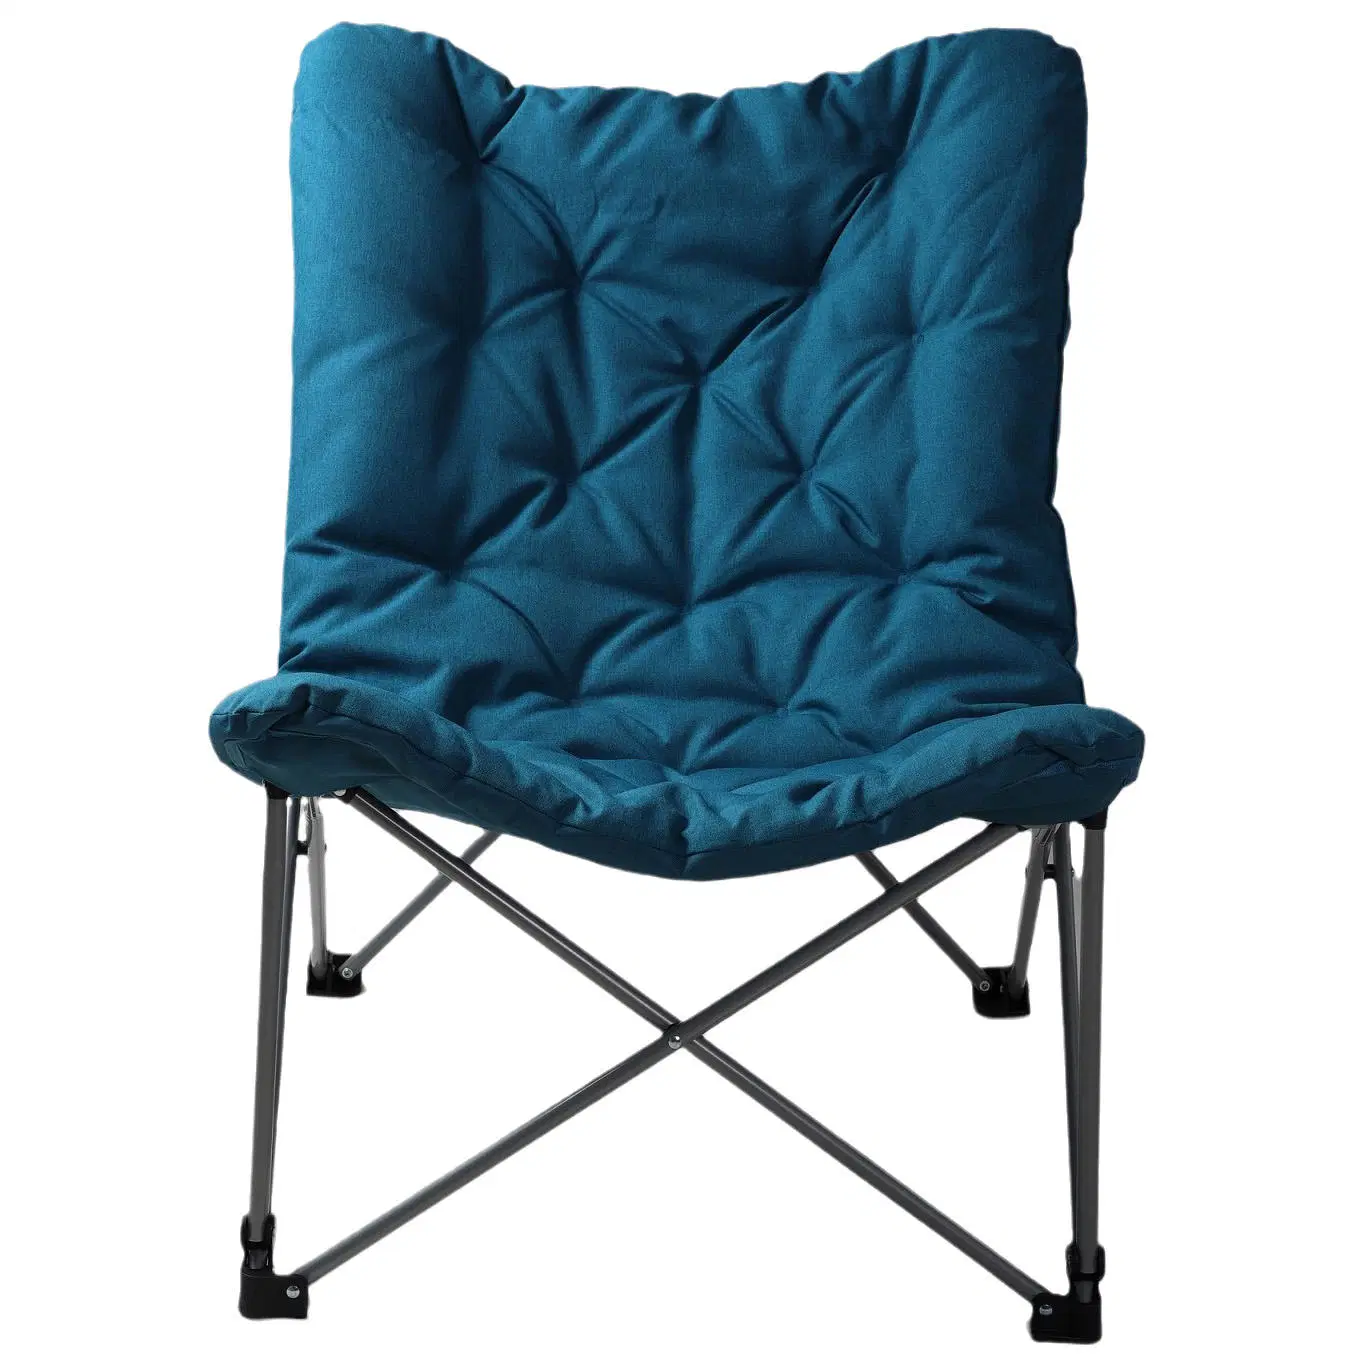 Metal Frame Lounge Furniture Soft Wide Seat Folding Saucer Padded Camping Chair